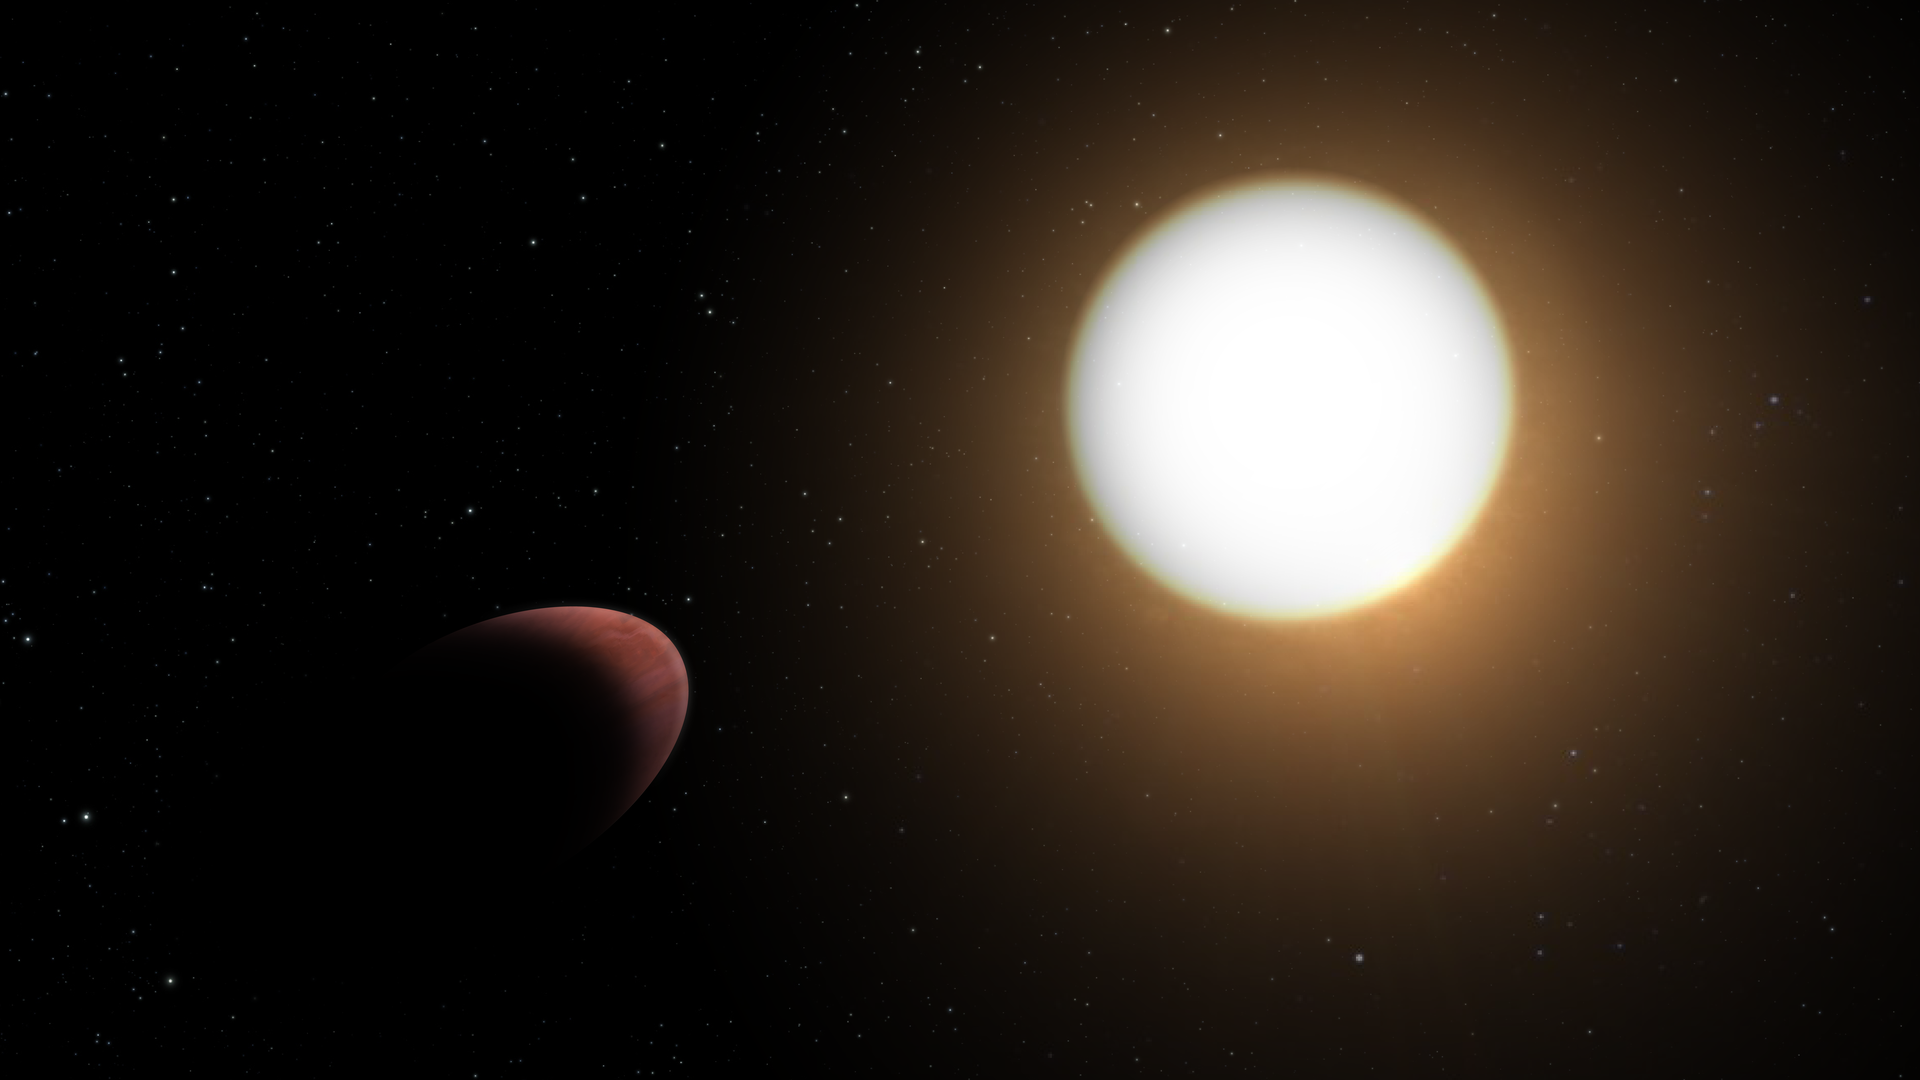 Artist impression of planet WASP-103b and its host star